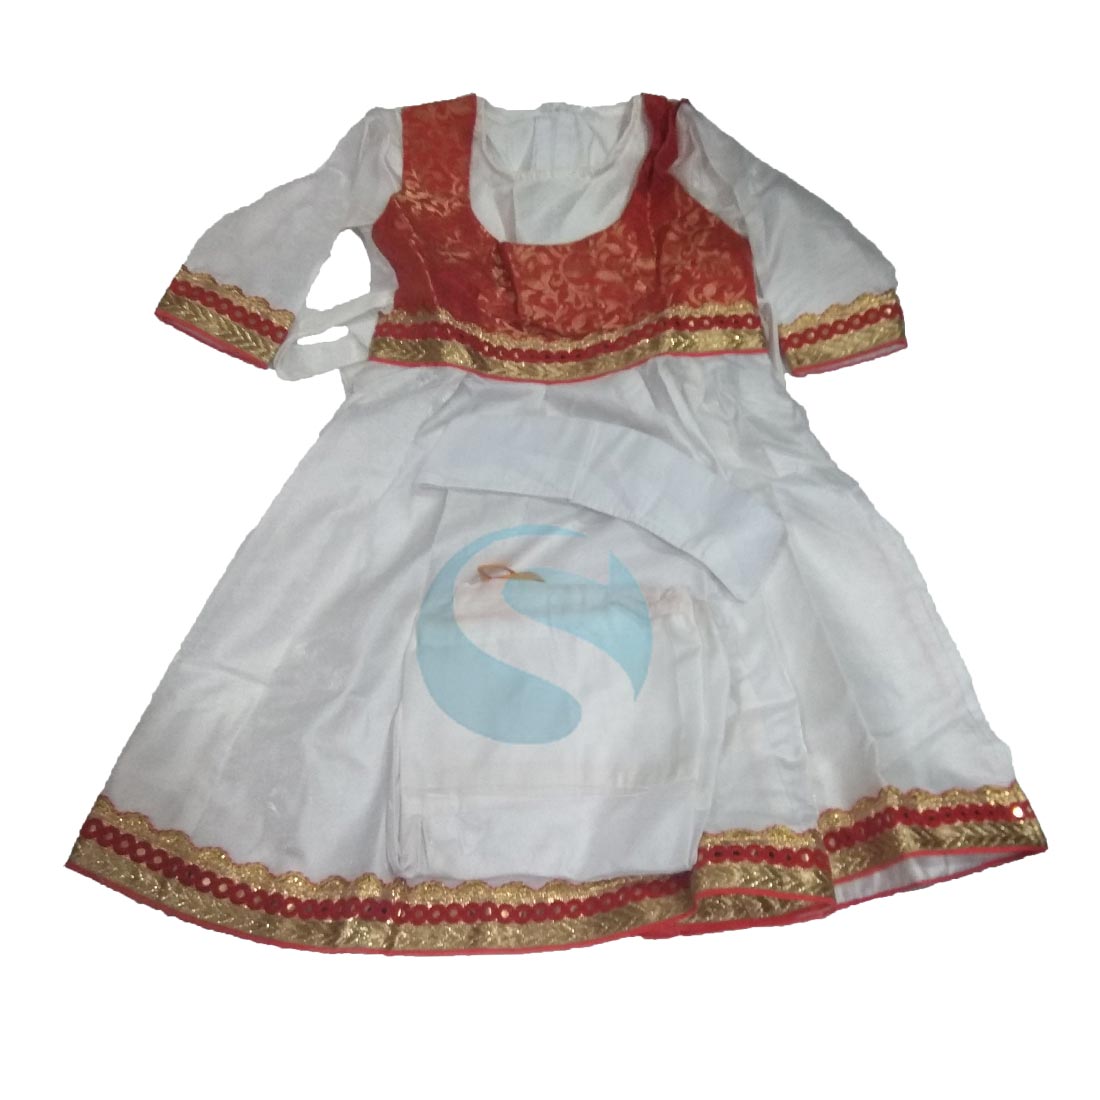 Cotton Red Kathak Dance Costume With Gold Border at Best Price in Jaipur |  Pushkar Fashion Industry